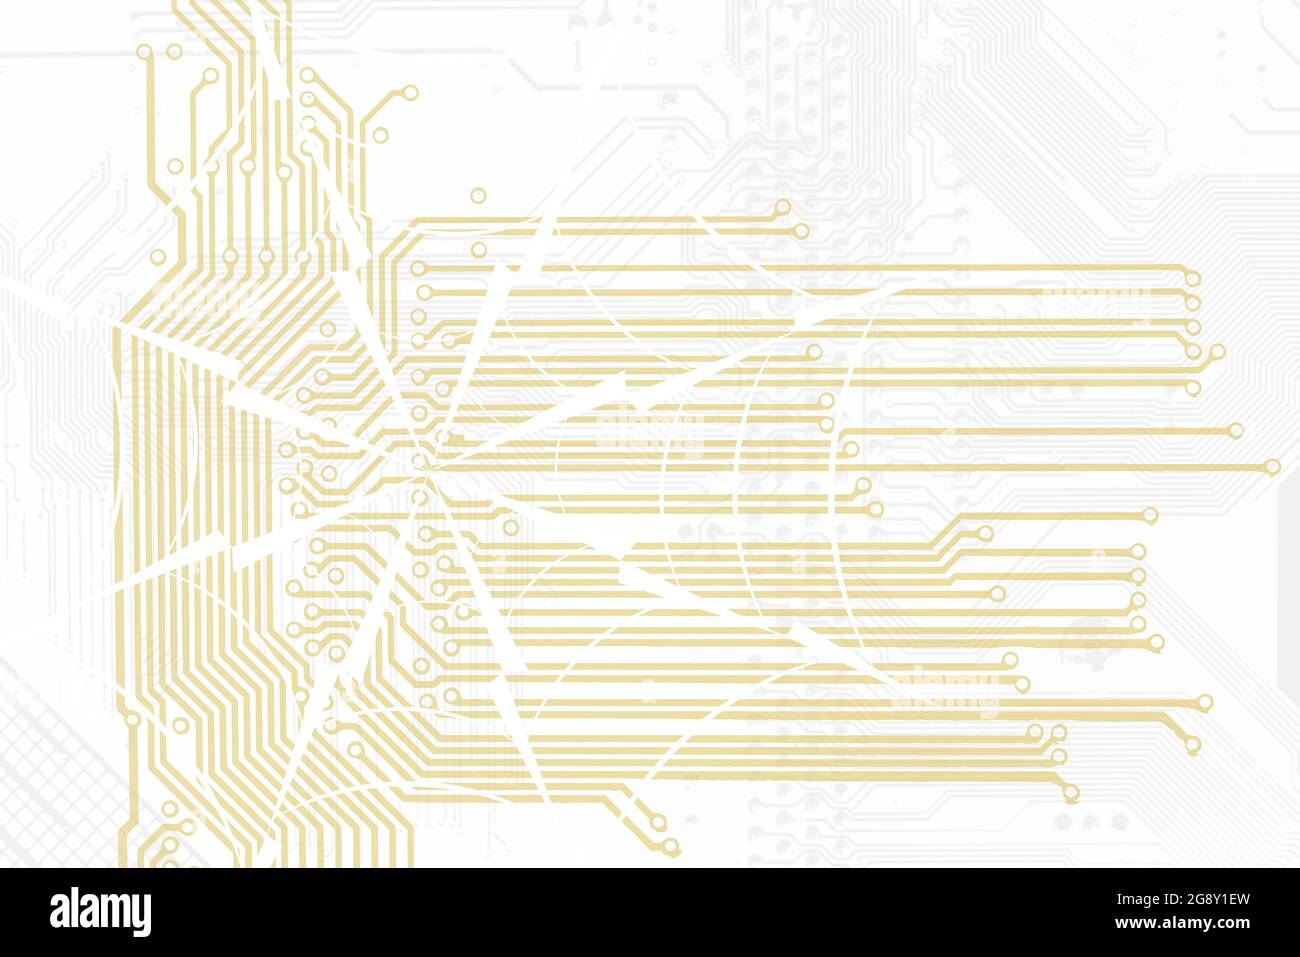 Conceptual background for your text. Information technologt motherboard silhouette pattern with spider web. Stock Photo